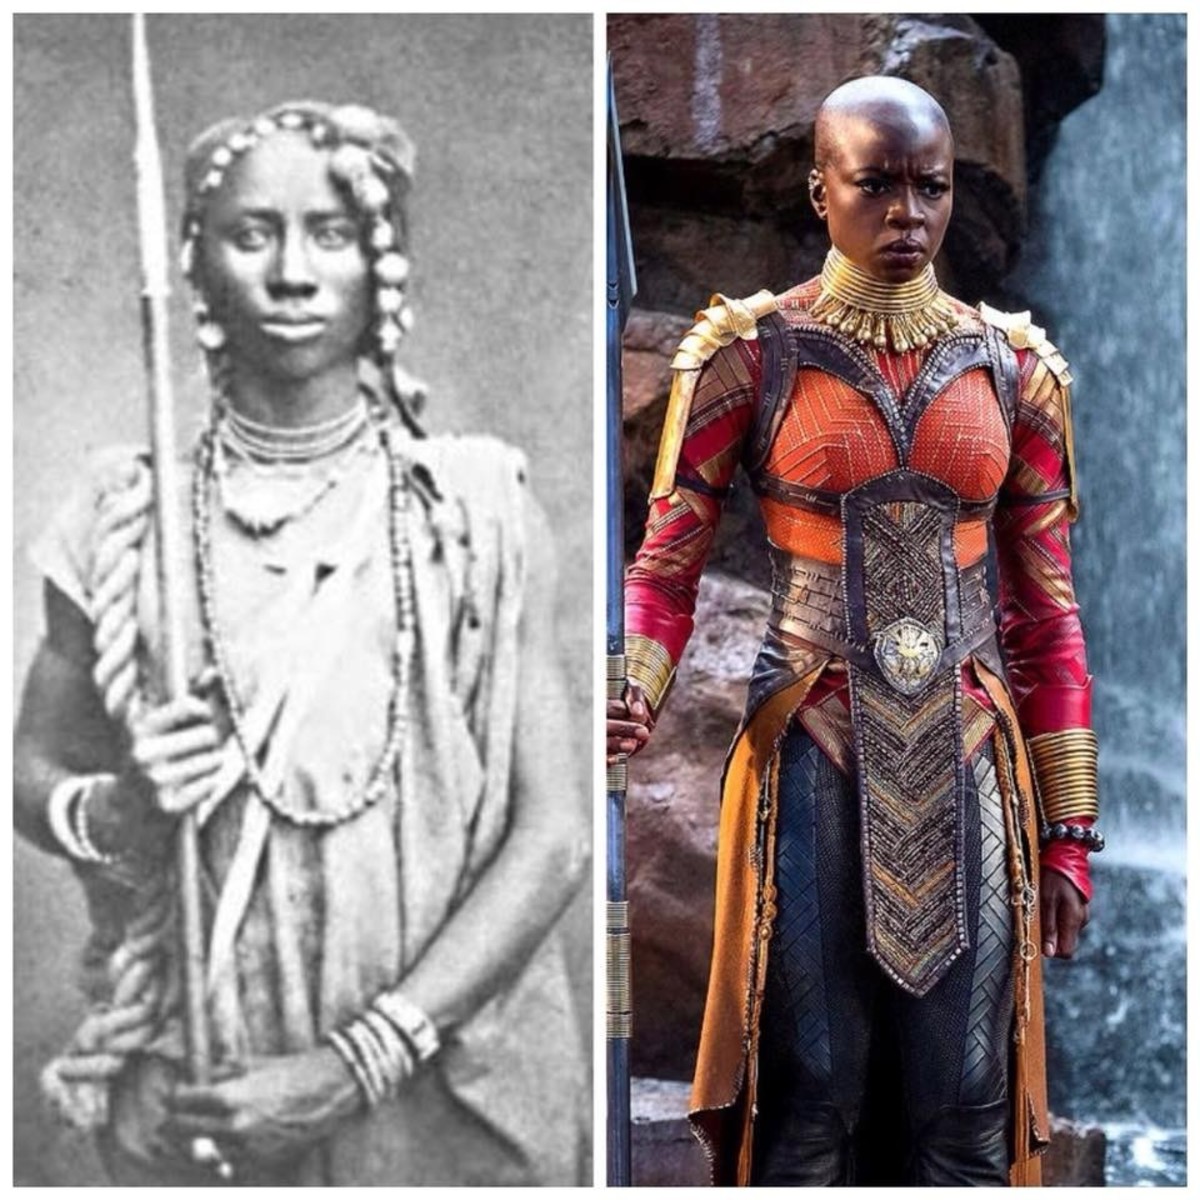 The Dahomey Amazons were not allowed to have children or have any kind of family life, as they were formally married to the King.